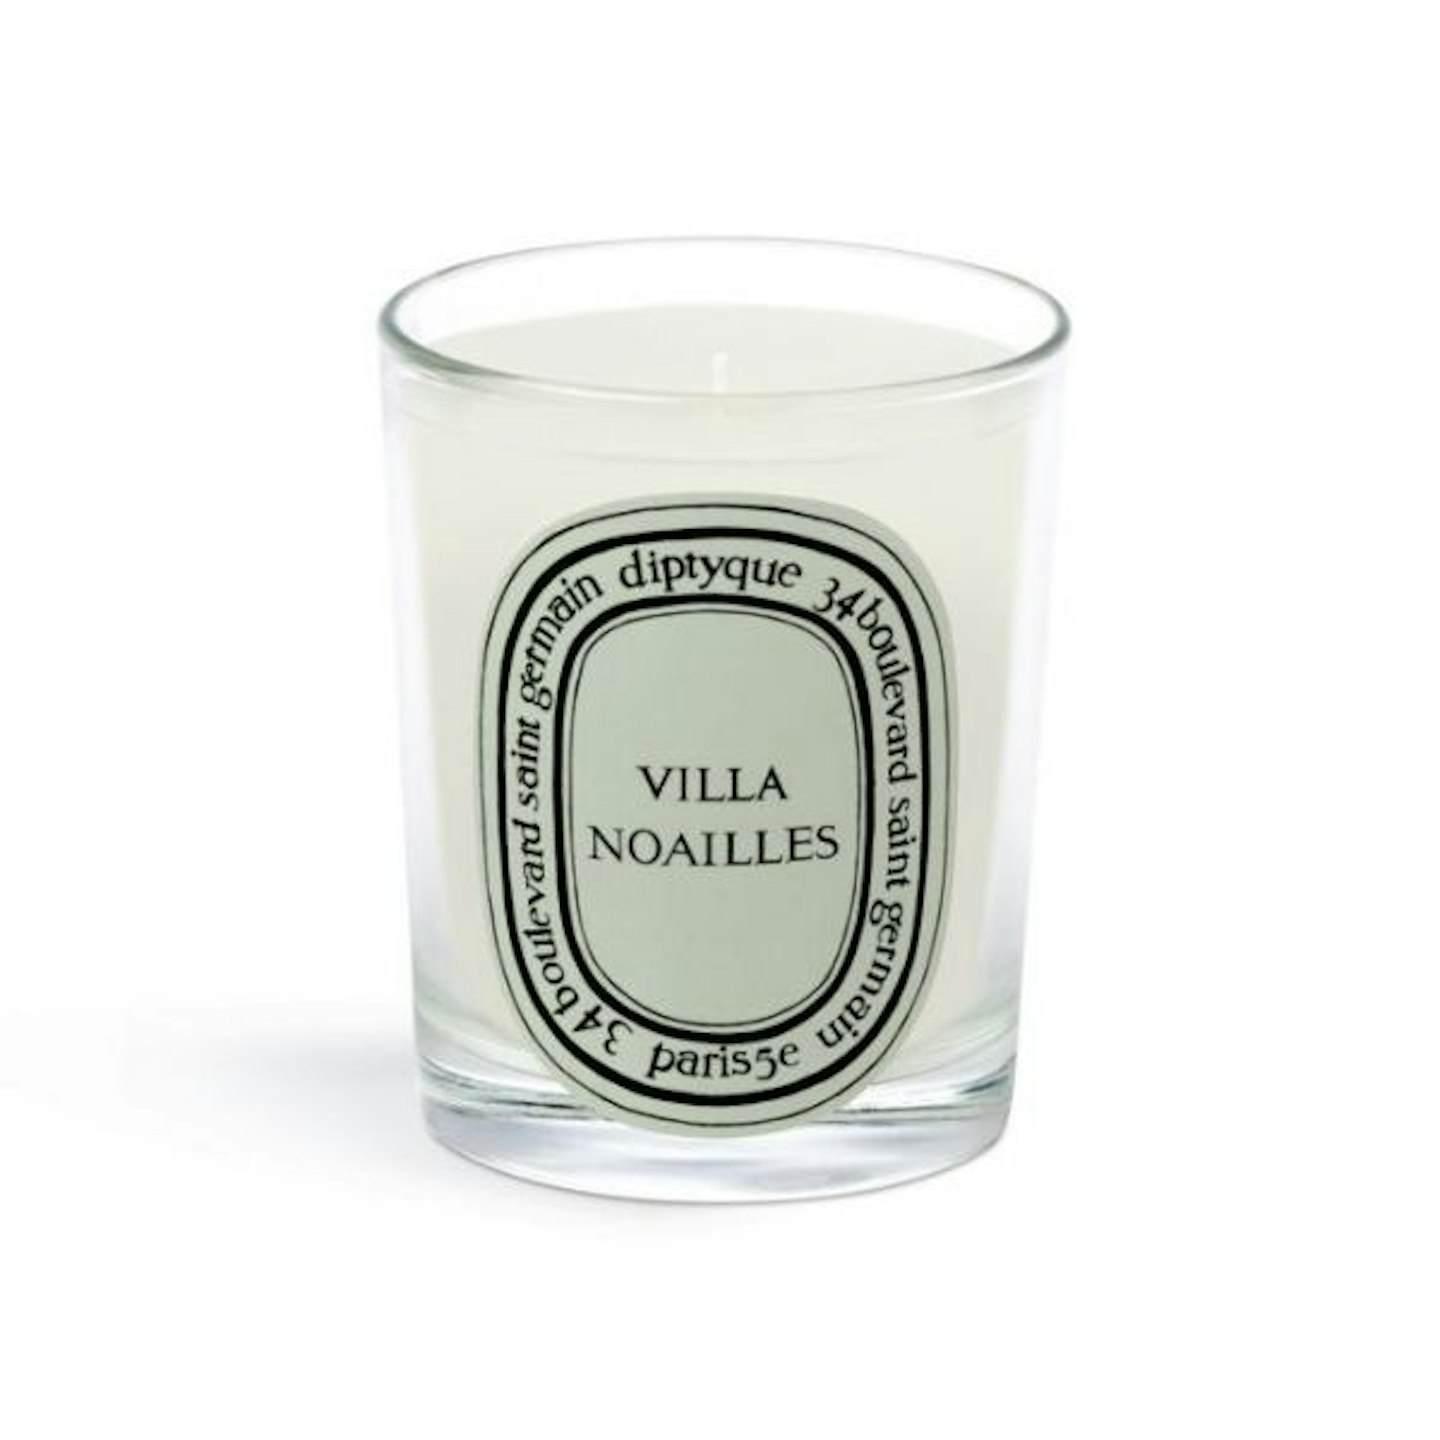 Limited Edition Romarin (Rosemary) Candle, 190g